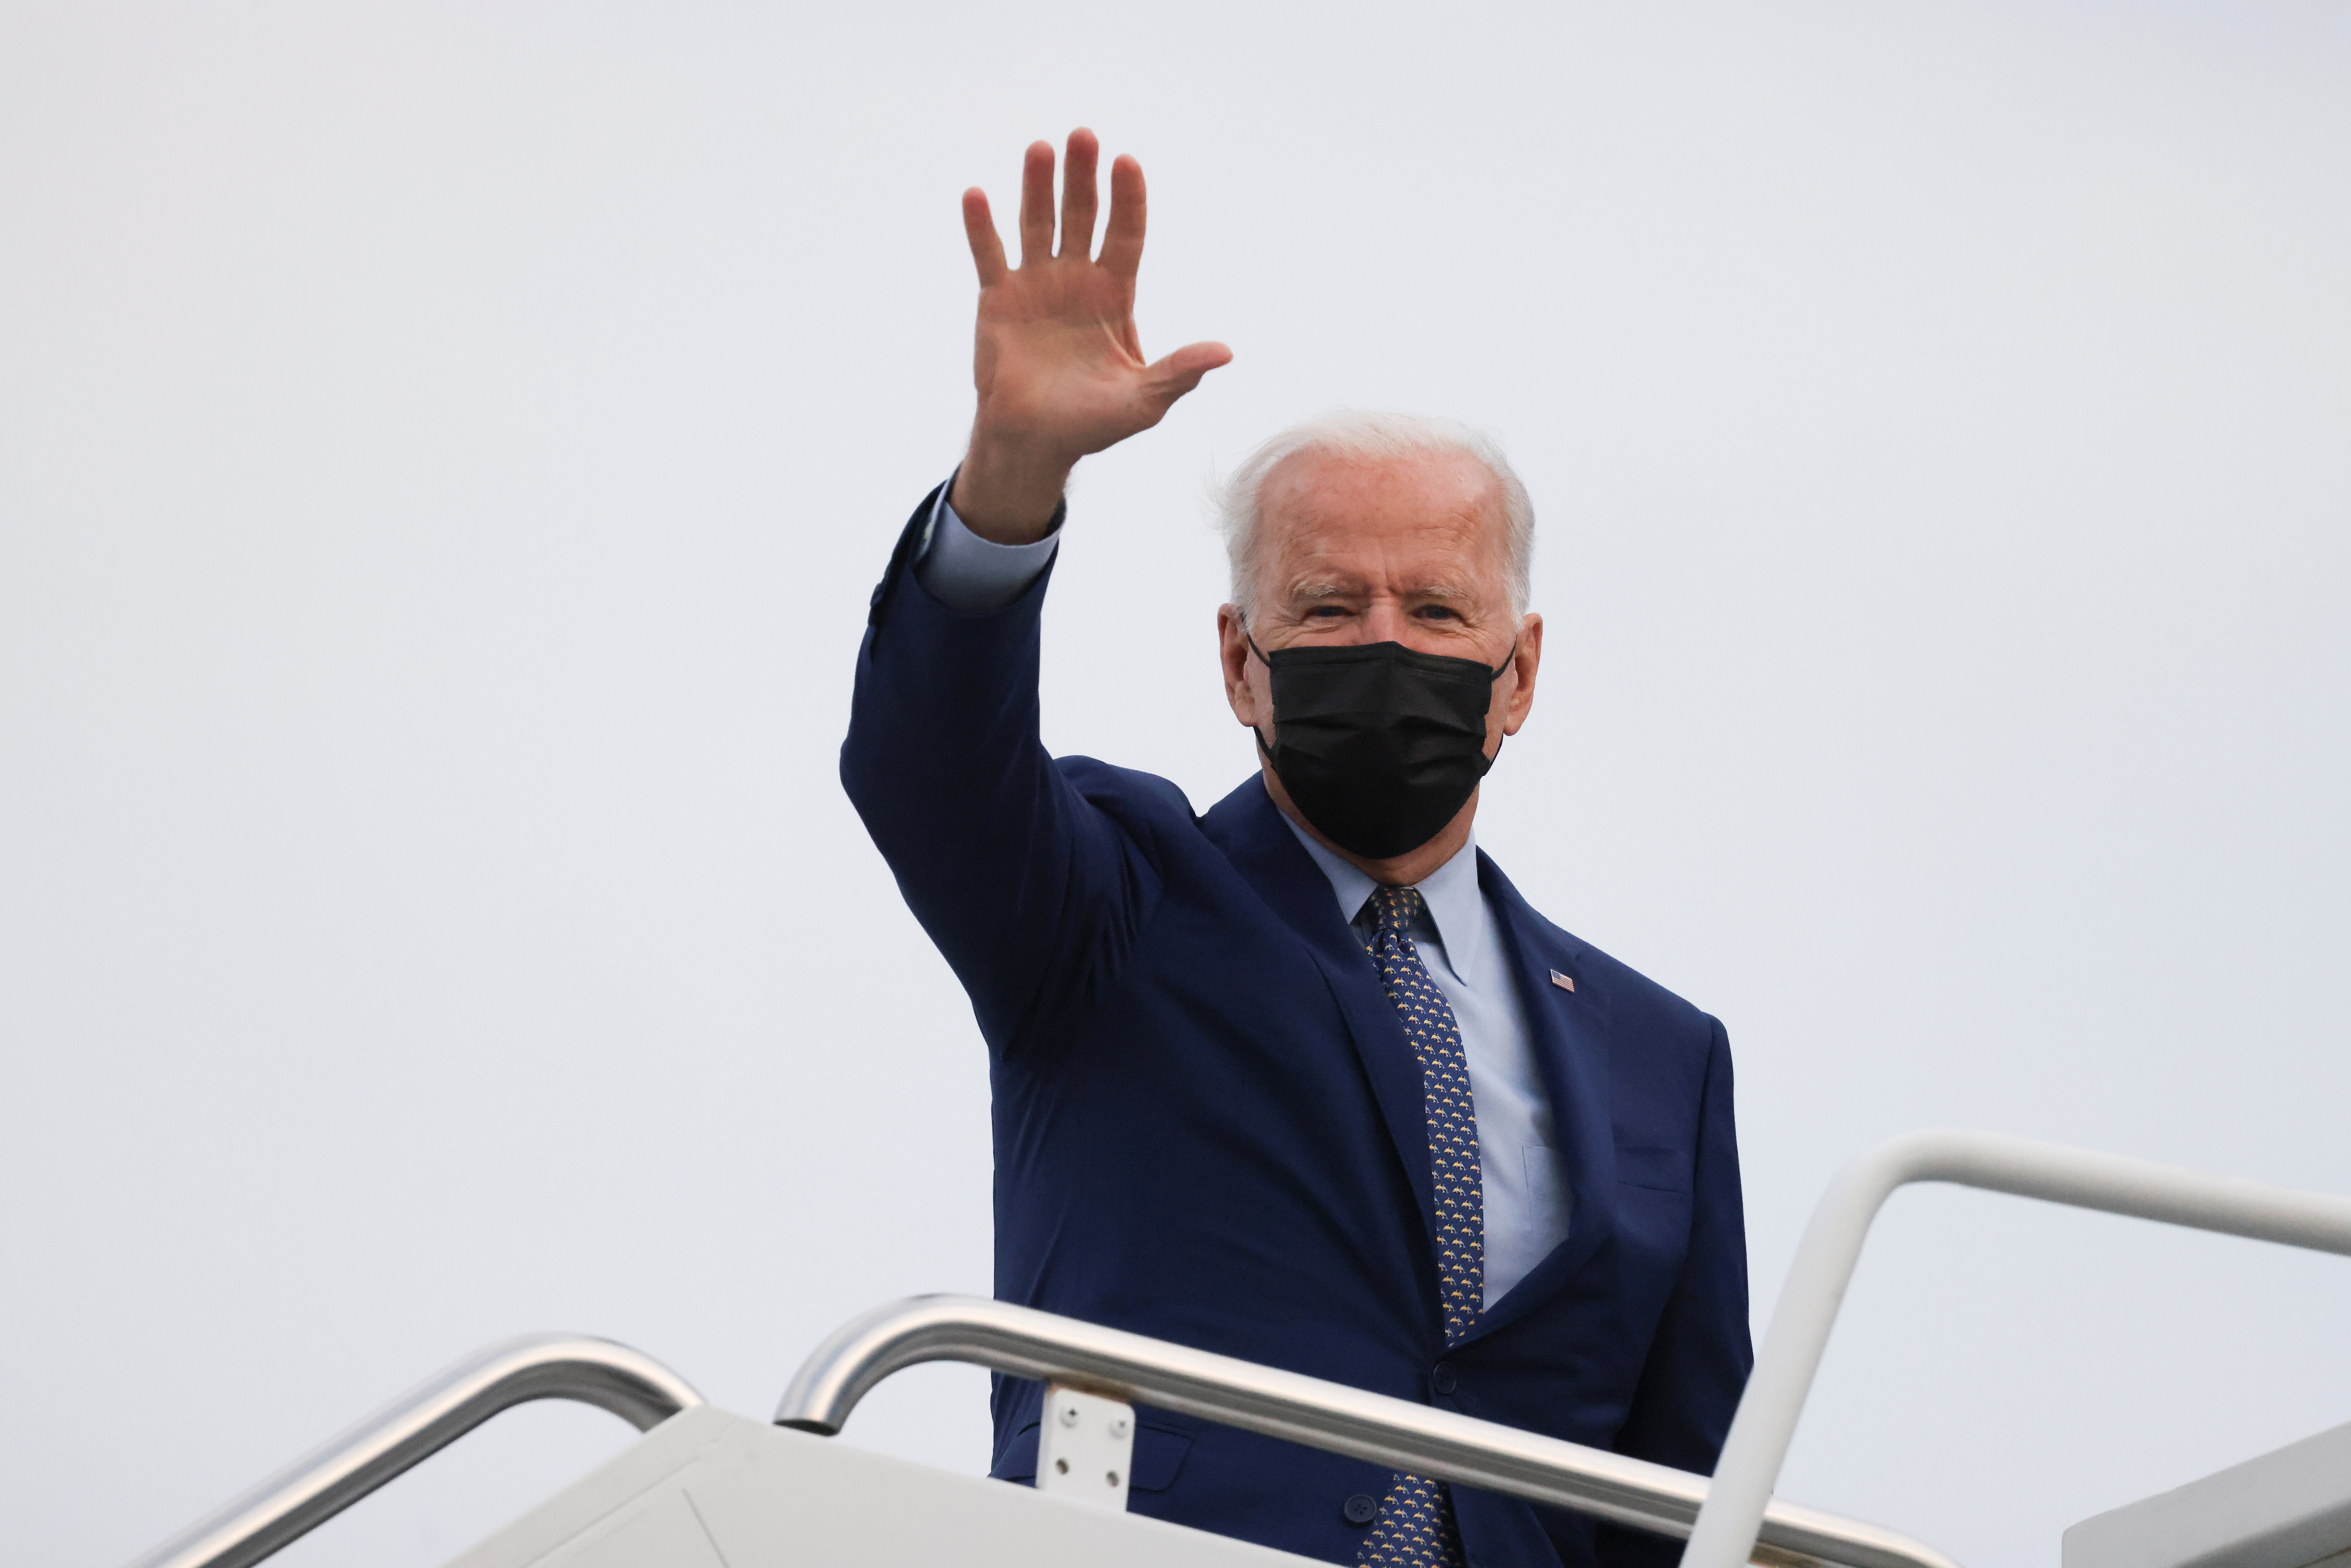 U.S. President Joe Biden waves as he boards Air Force One after attending the Democratic National Committee's 